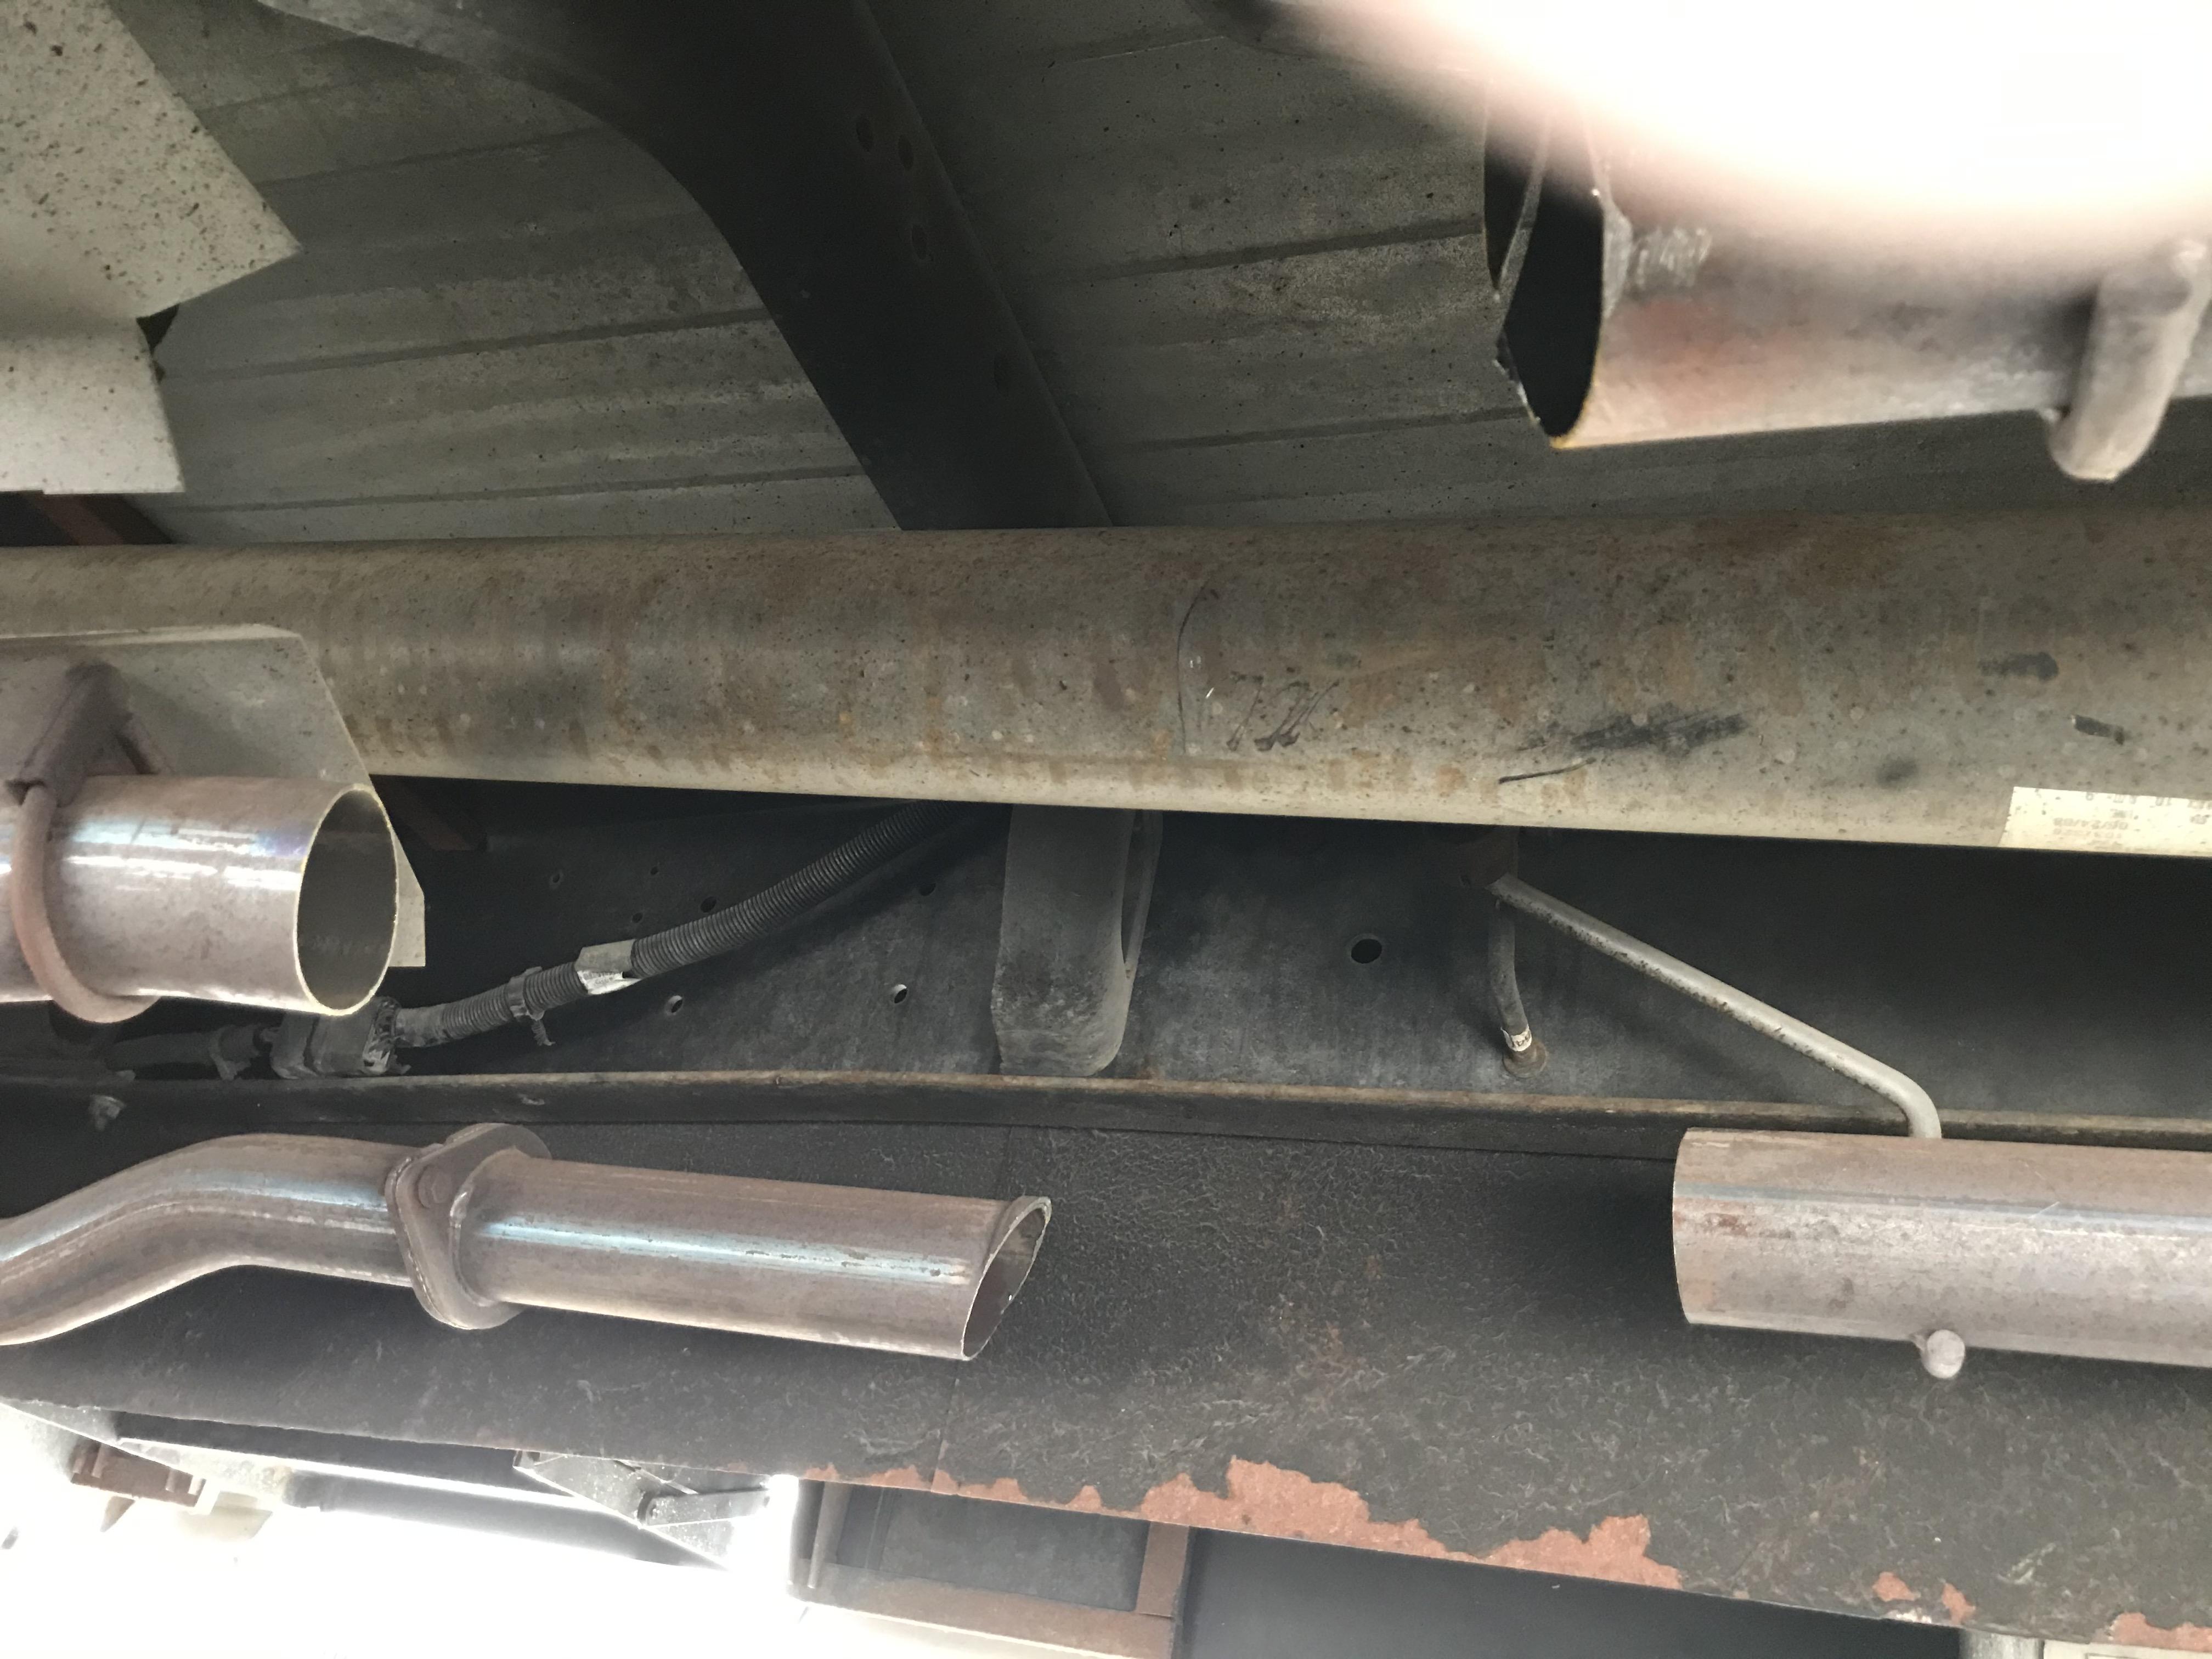 catalytic convertors stolen - Chassis - FMCA RV Forums – A Community of Replacing Stolen Catalytic Converter With Straight Pipe